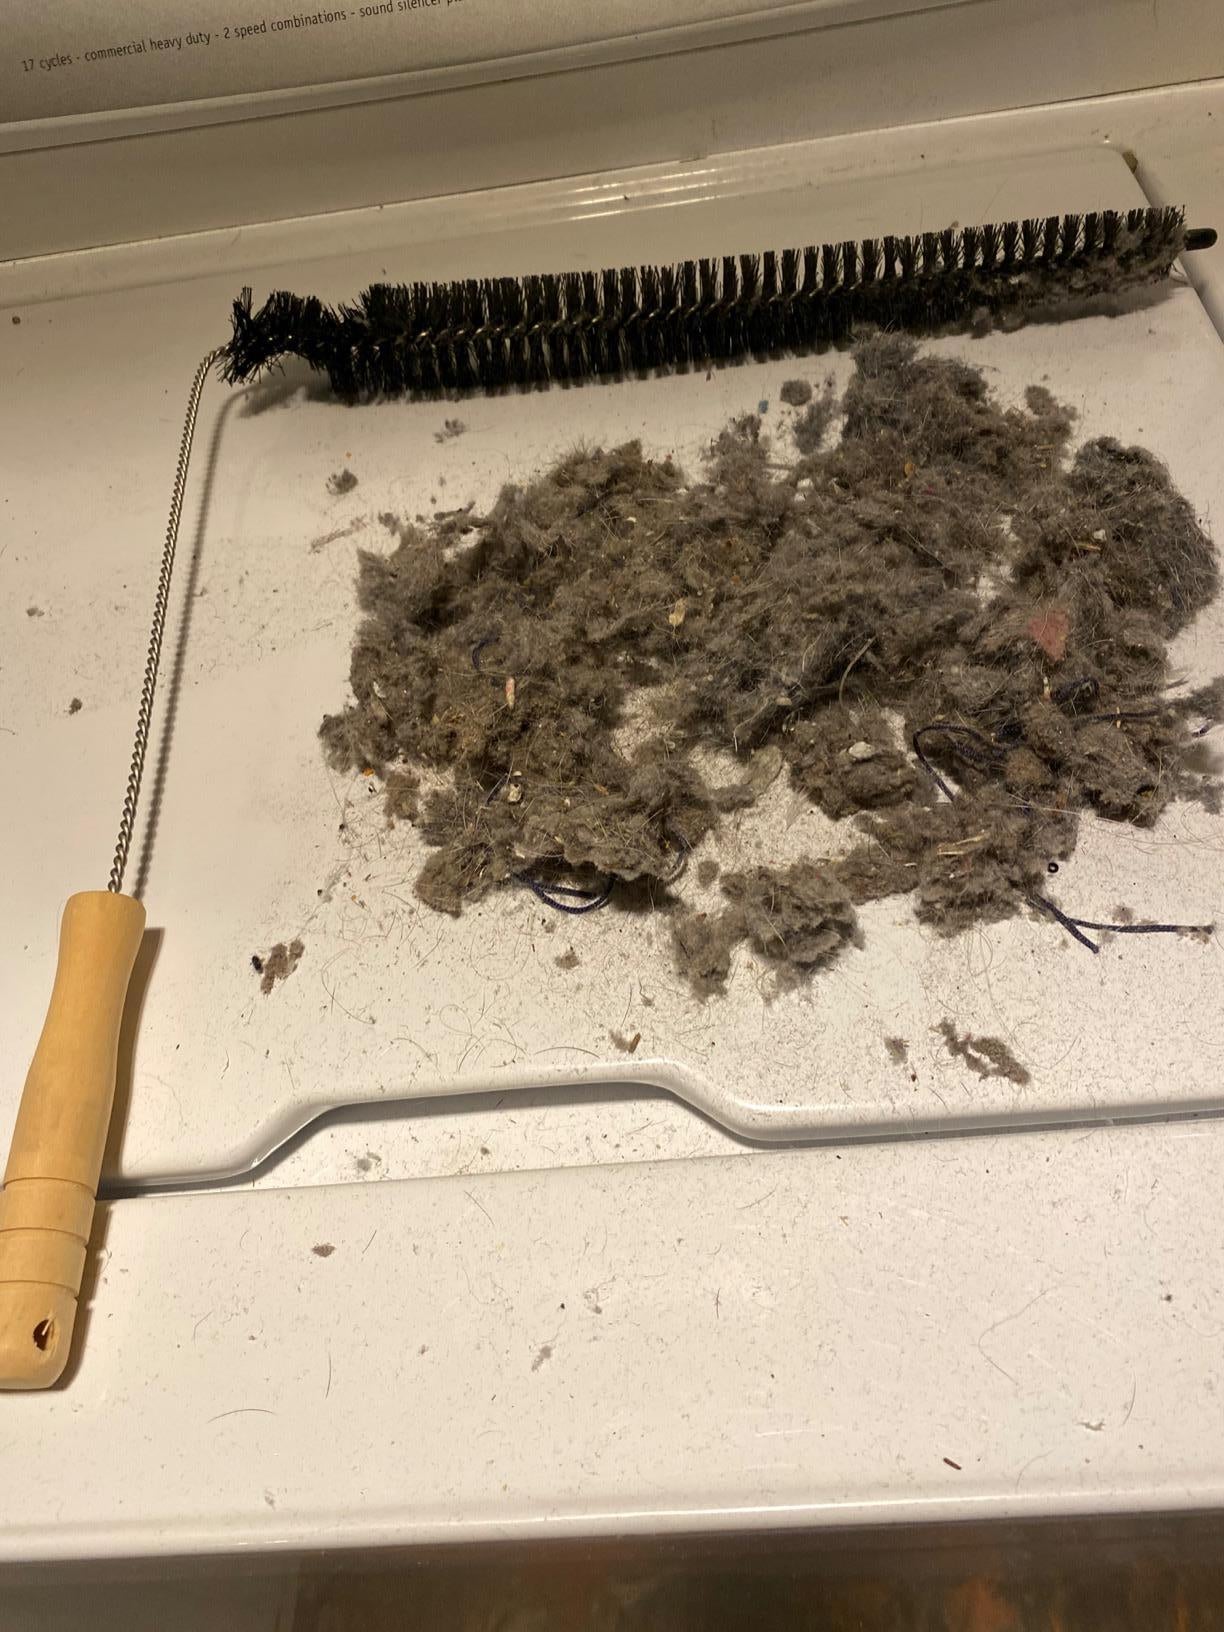 reviewer image of a dryer vent cleaner next to a mound of lint and dirt